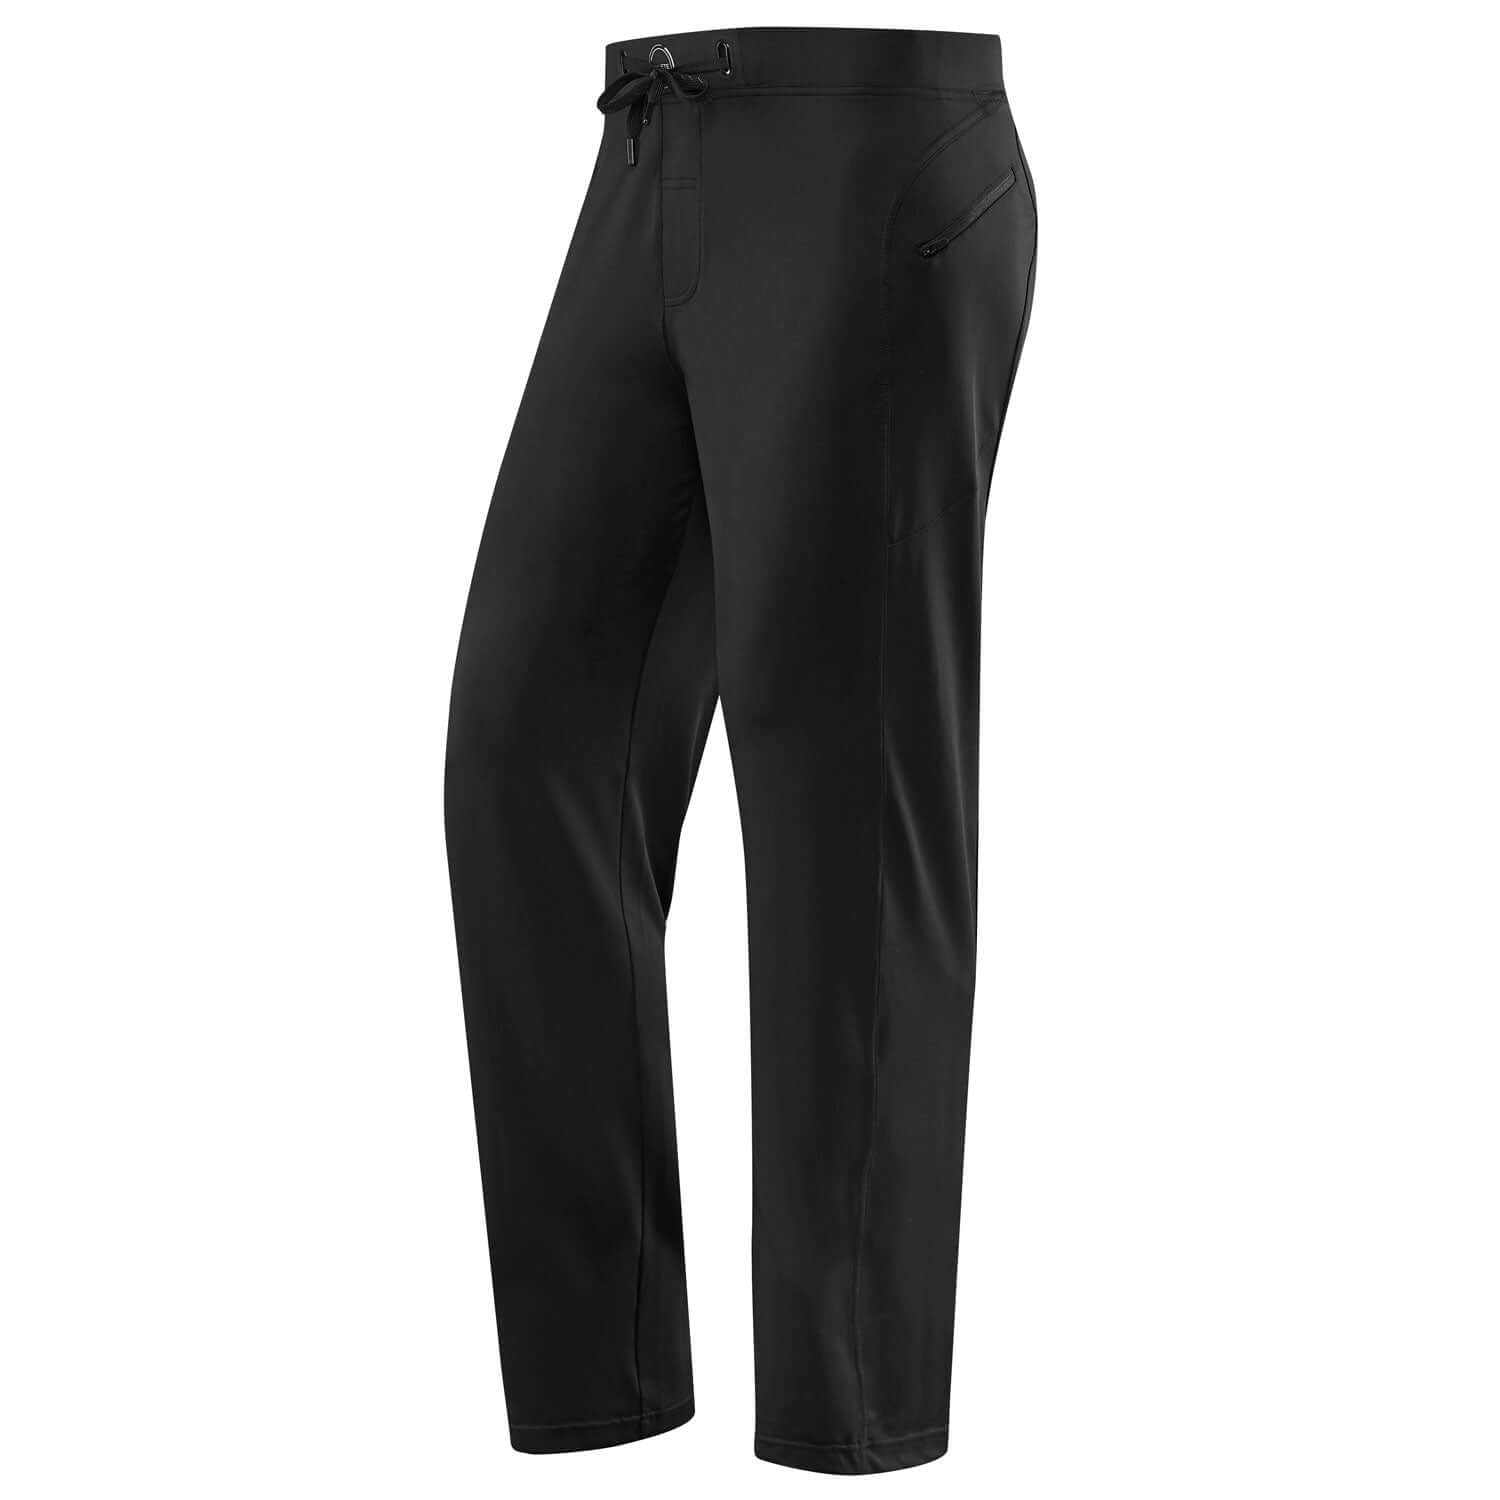 Helix II Workout Pant With Pockets